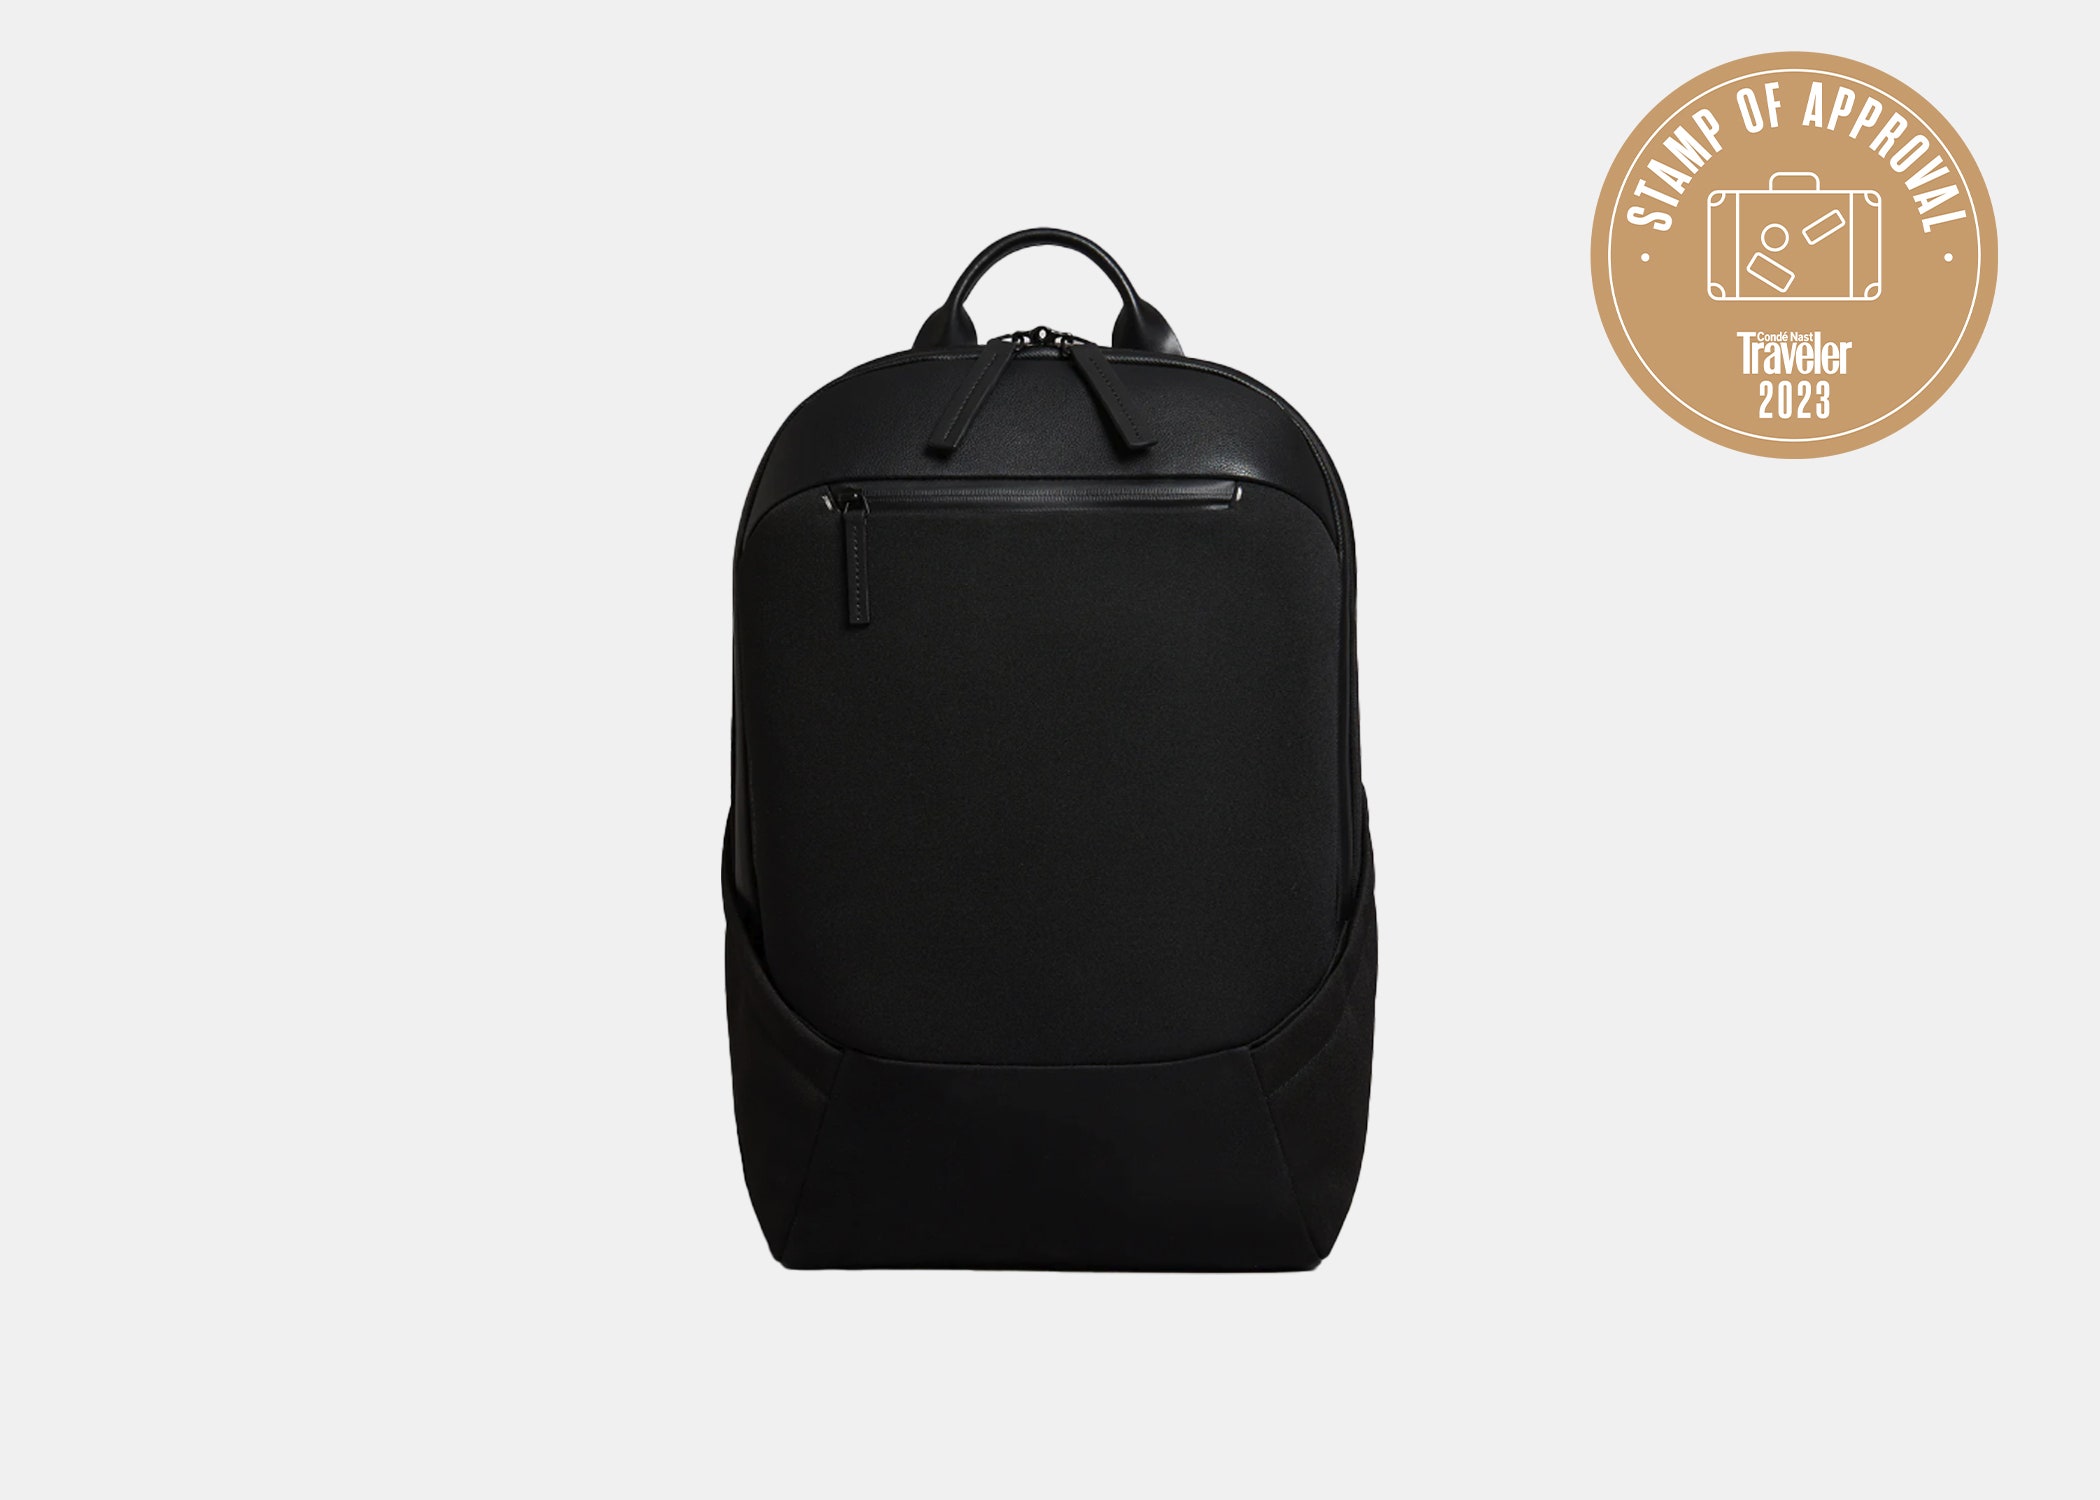 <p>If you're looking for a sleek yet functional bag that's polished enough for the office, look no further than Troubadour's Apex backpack. Made of waterproof fabric, Kenny says this lightweight backpack is perfect for busy commuters. It fits up to a 17" laptop and has multiple pockets for small essentials like AirPods, glasses, or a wallet. This stylish backpack also features a breathable back panel and ergonomic padded shoulder straps for added comfort. “This would be a great bag for business trip and thanks to its trolley sleeve, it fits nicely on your carry-on," says Kenny.</p> <p><strong>Pros:</strong> Padded laptop compartment, waterproof material, trolley sleeve<br> <strong>Cons:</strong> Not ideal for active days outdoors due to its sophisticated look</p> $245, Troubadour. <a href="https://www.troubadourgoods.com/collections/backpacks/products/apex-backpack-2-0">Get it now!</a><p>Sign up to receive the latest news, expert tips, and inspiration on all things travel</p><a href="https://www.cntraveler.com/newsletter/the-daily?sourceCode=msnsend">Inspire Me</a>